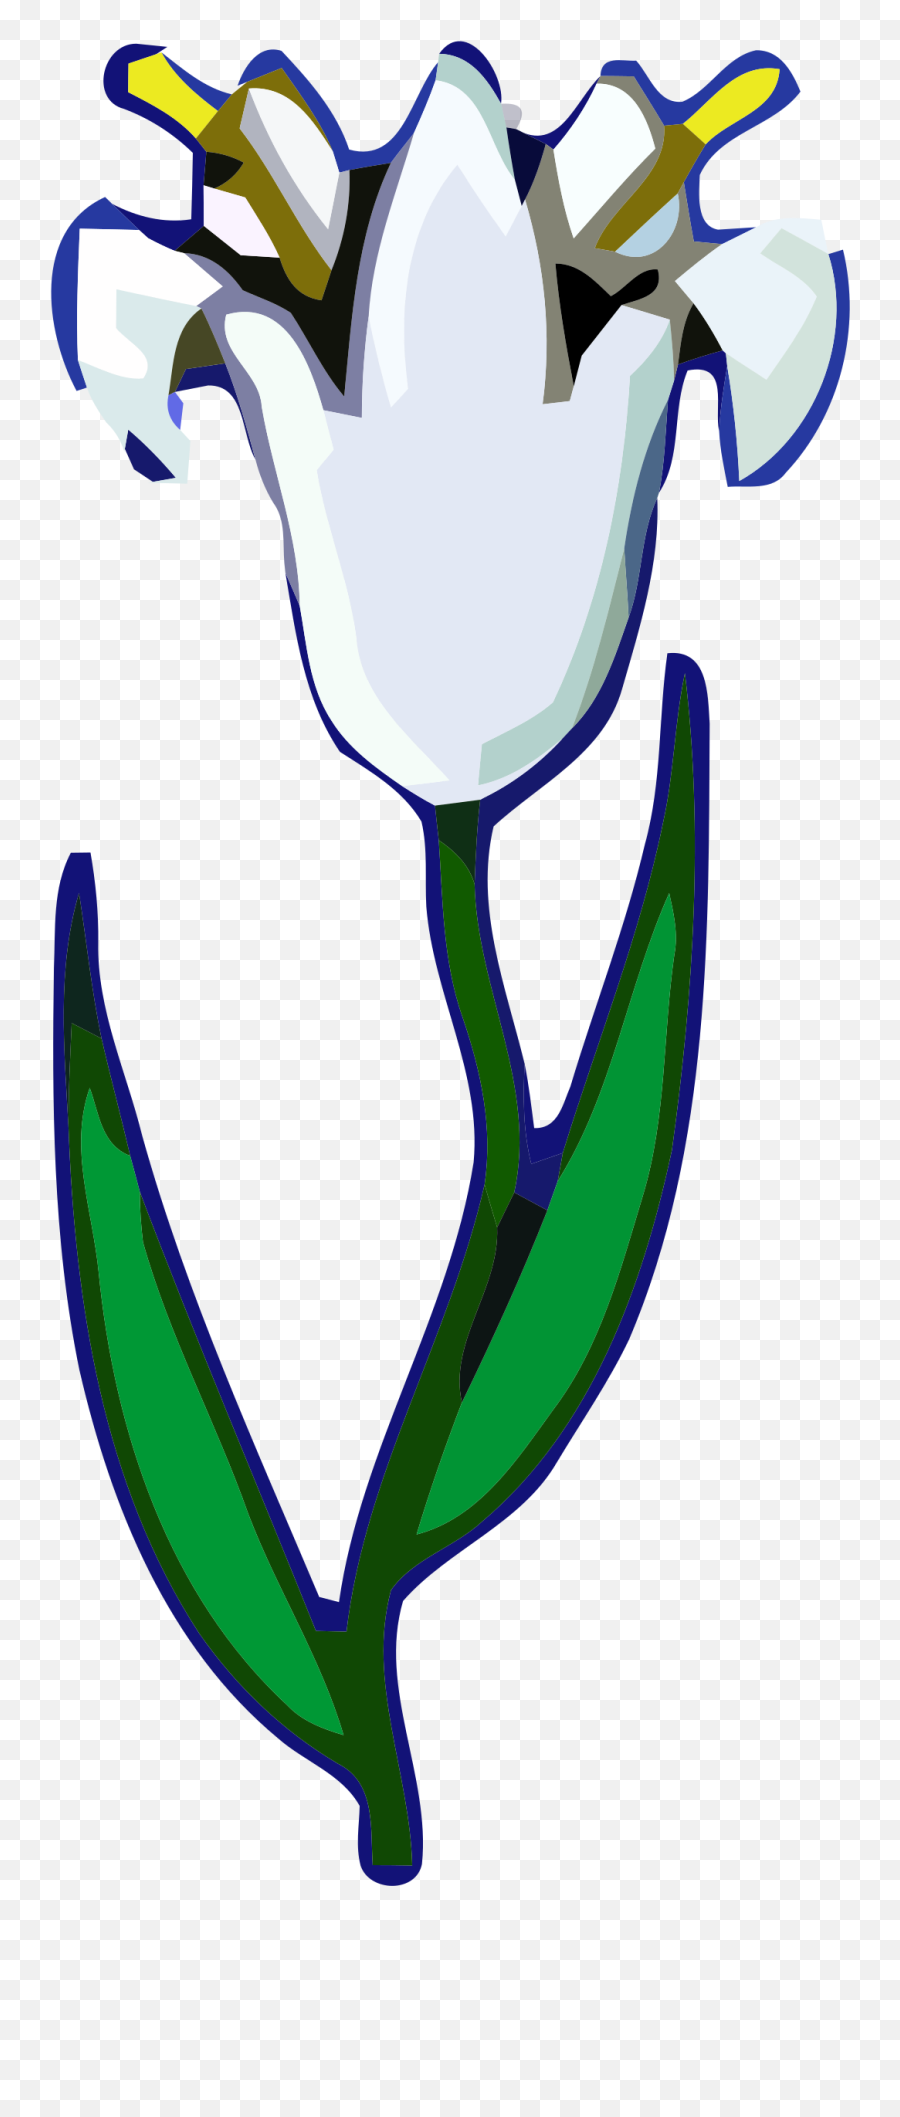 Filelily Icon Whitesvg - Wikimedia Commons Lilies Png,Lillie Icon